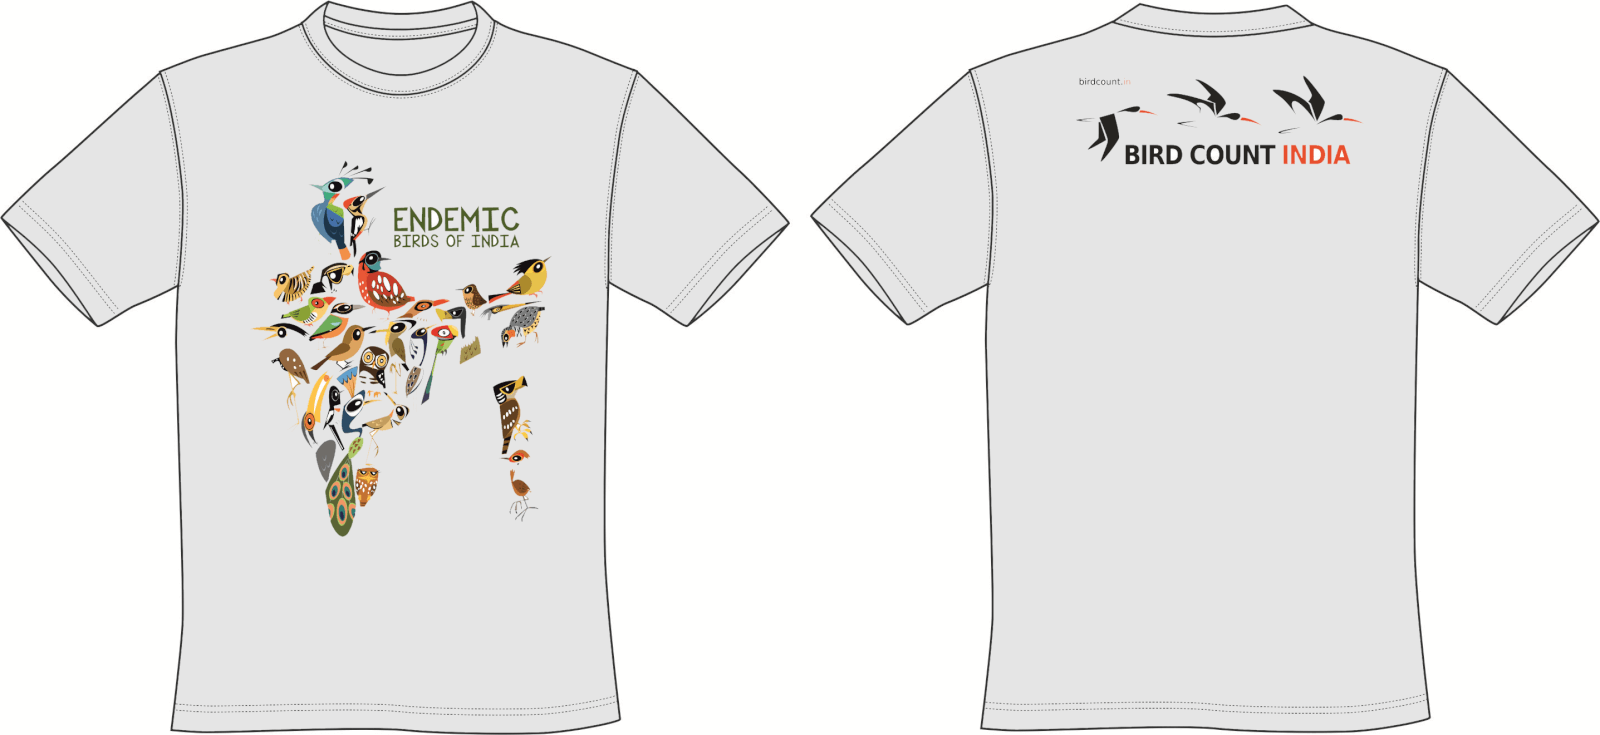 https://birdcount.in/wp-content/uploads/2016/04/tshirt-endemicbirds.png